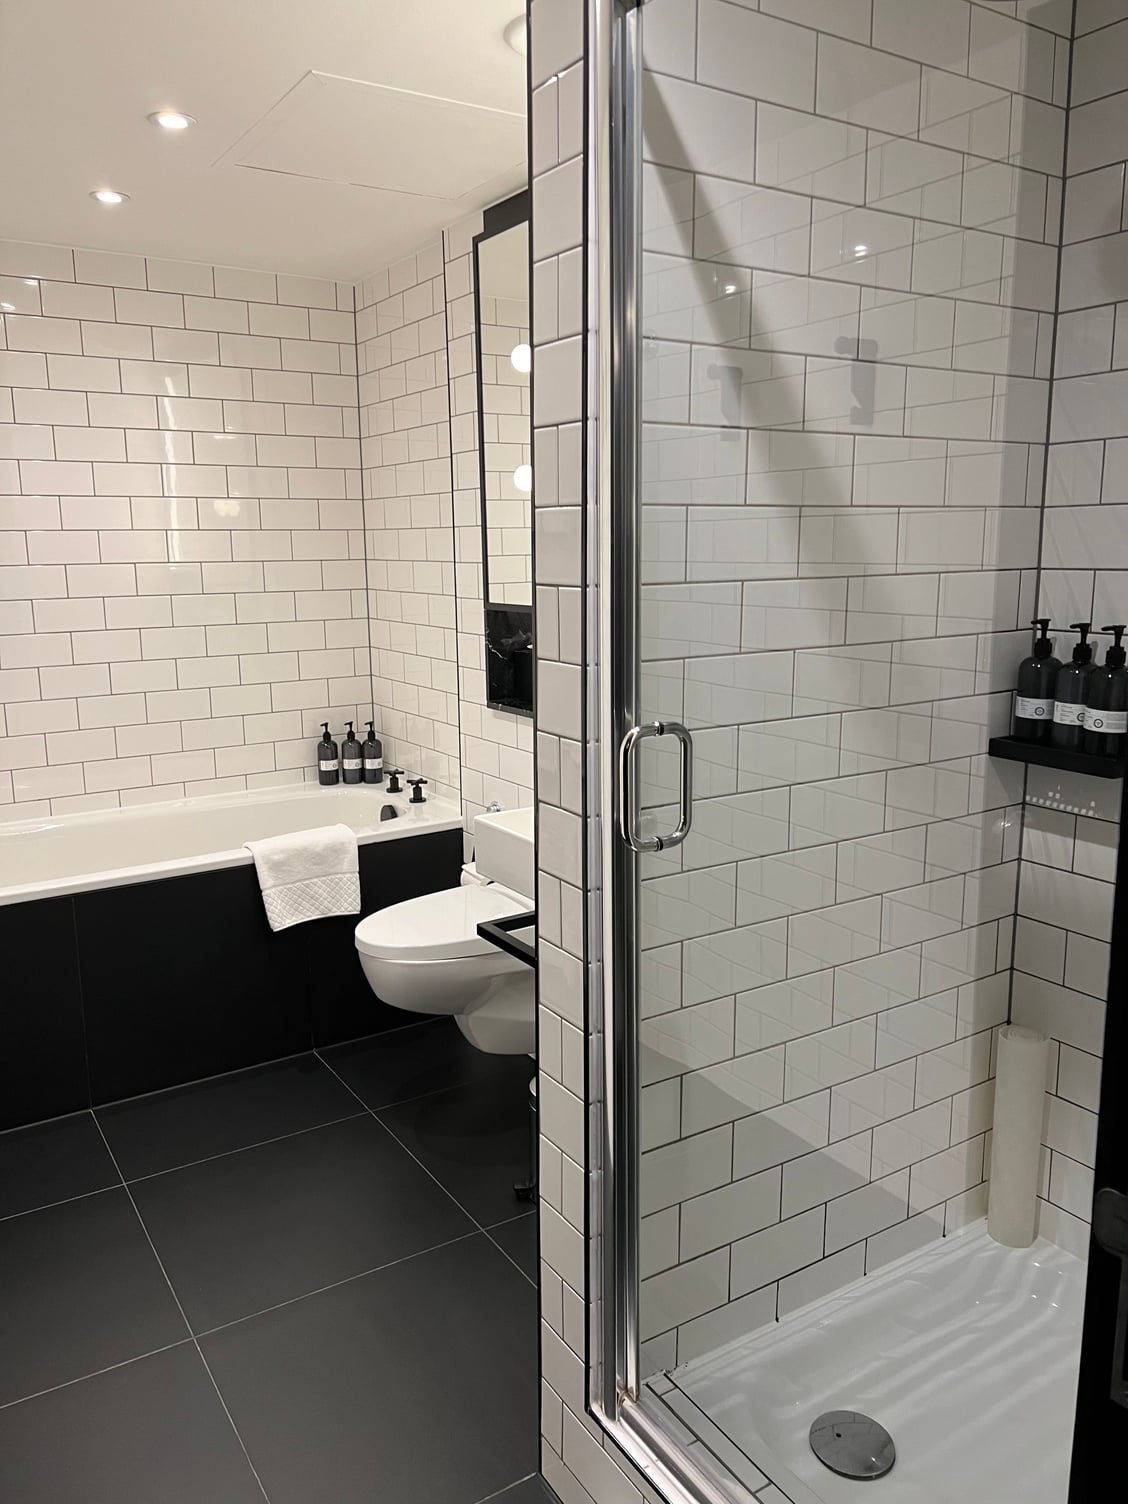 Andaz Liverpool Street - London - REVIEW - MASTER THREAD - Page 60 ...